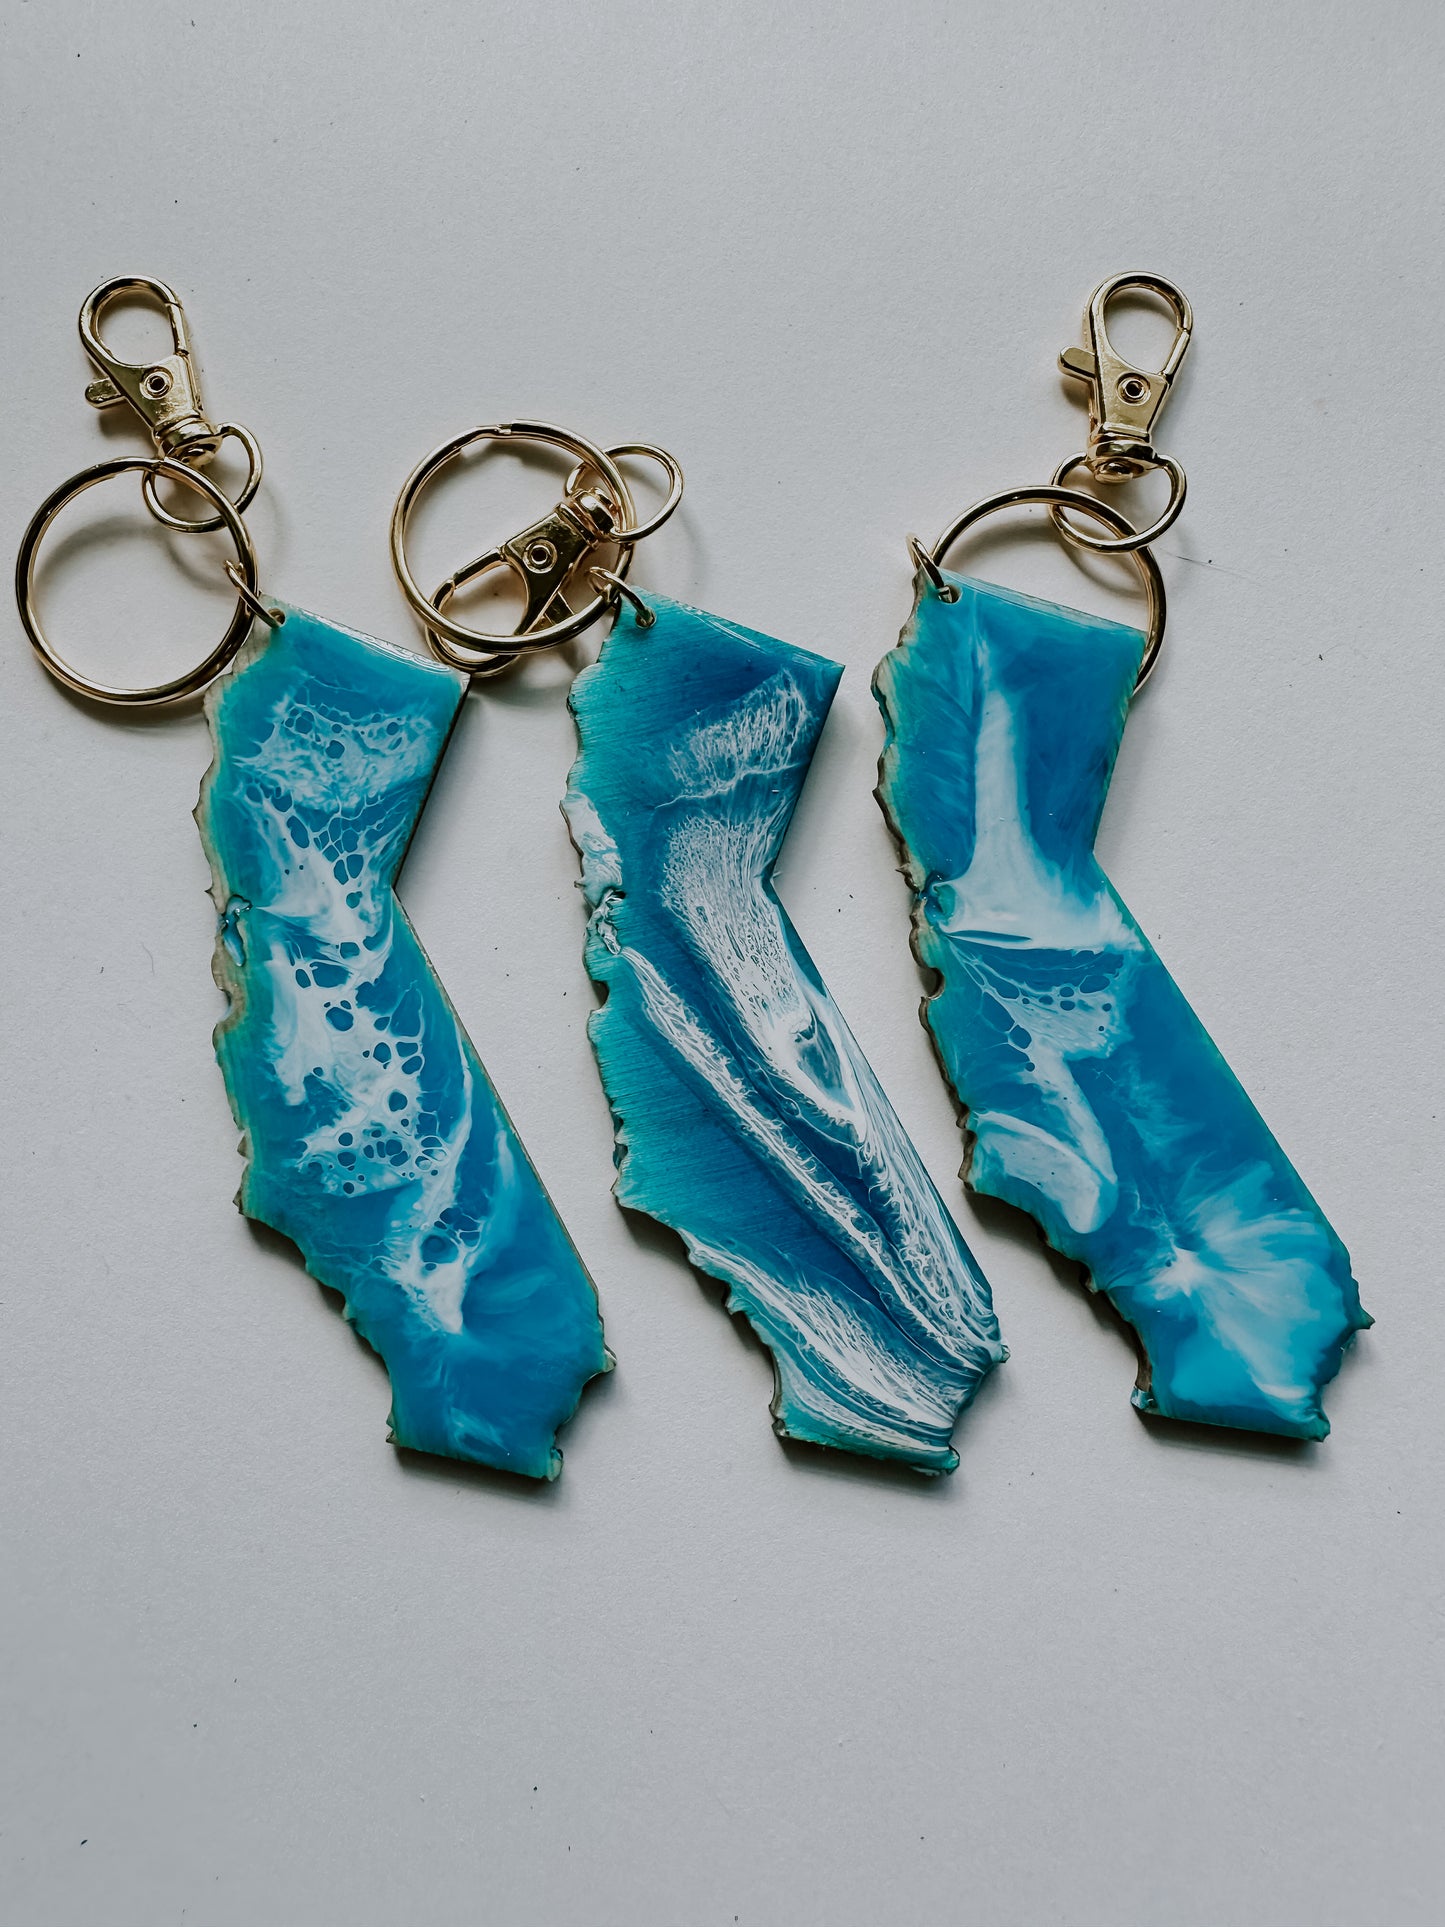 California wave keychain or magnet